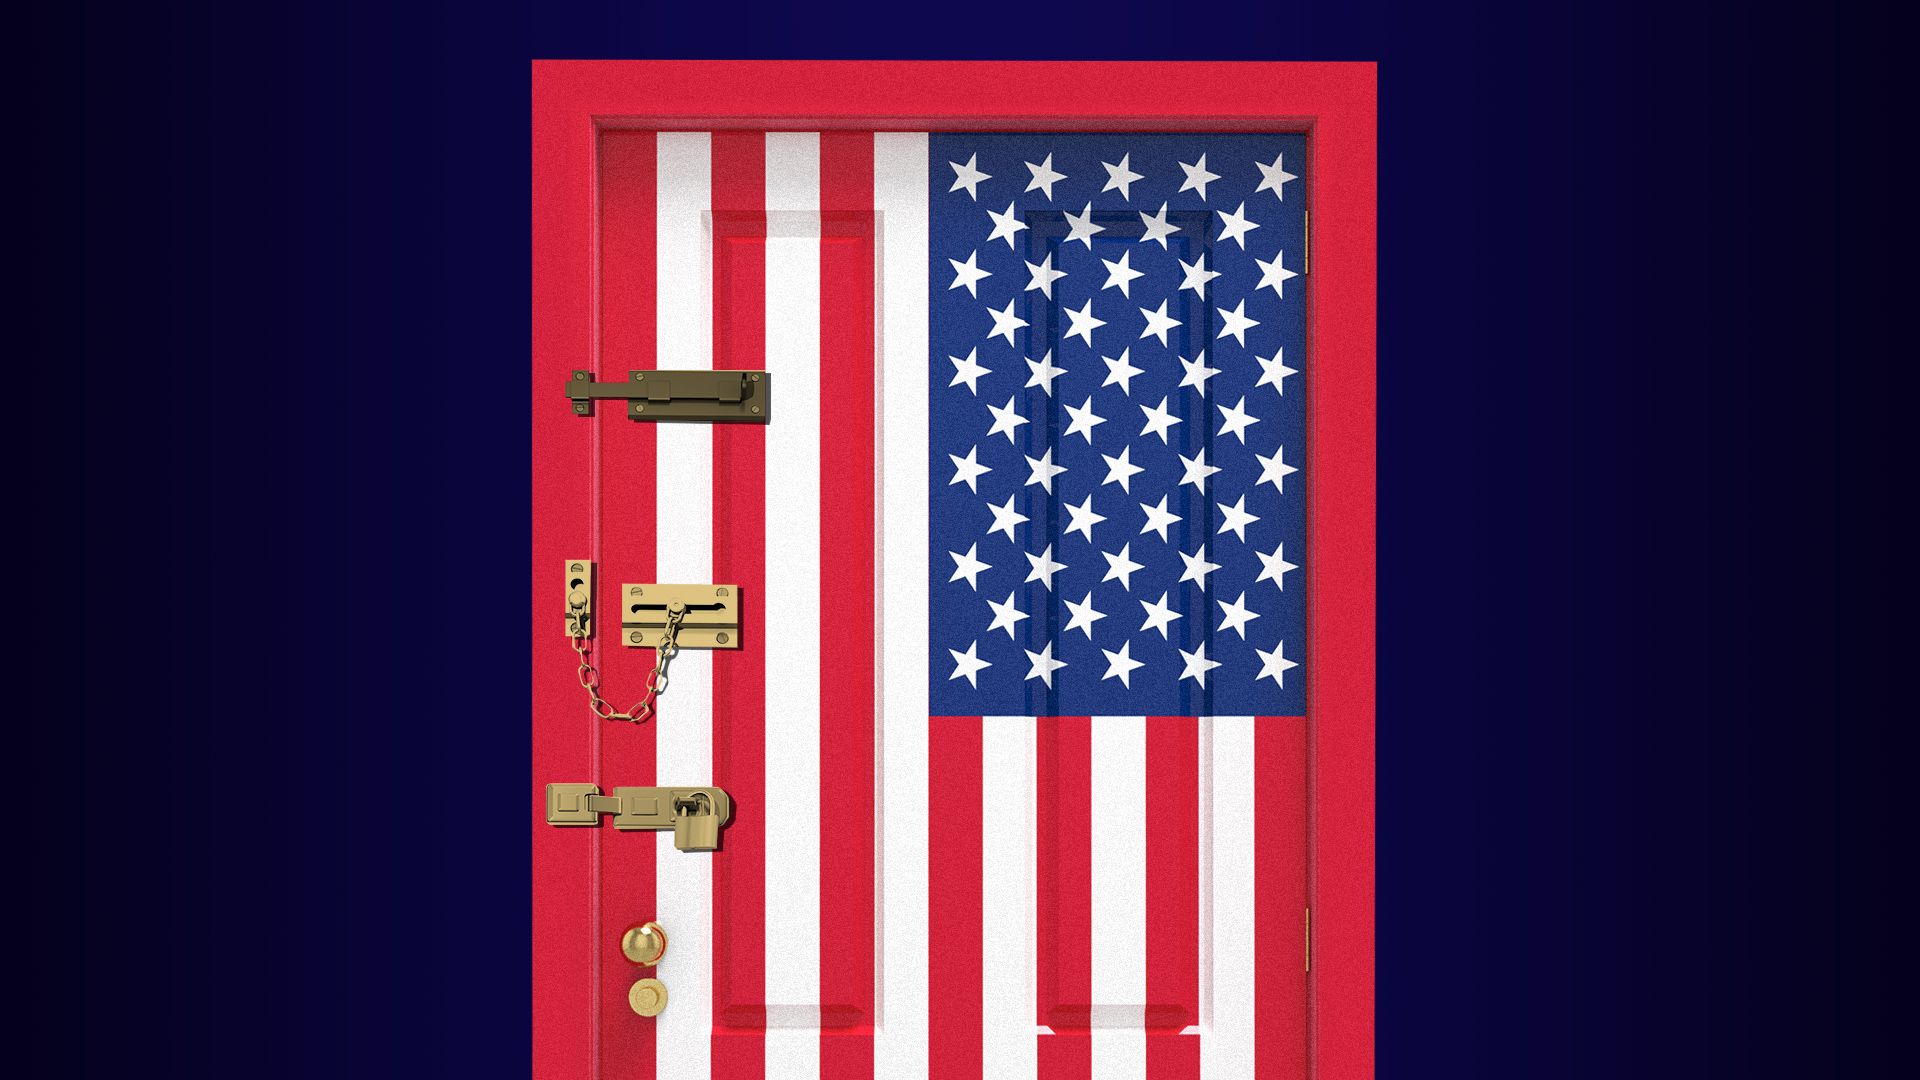 Illustration of a door made of an American flag with multiple locks alongside the edge of the door.